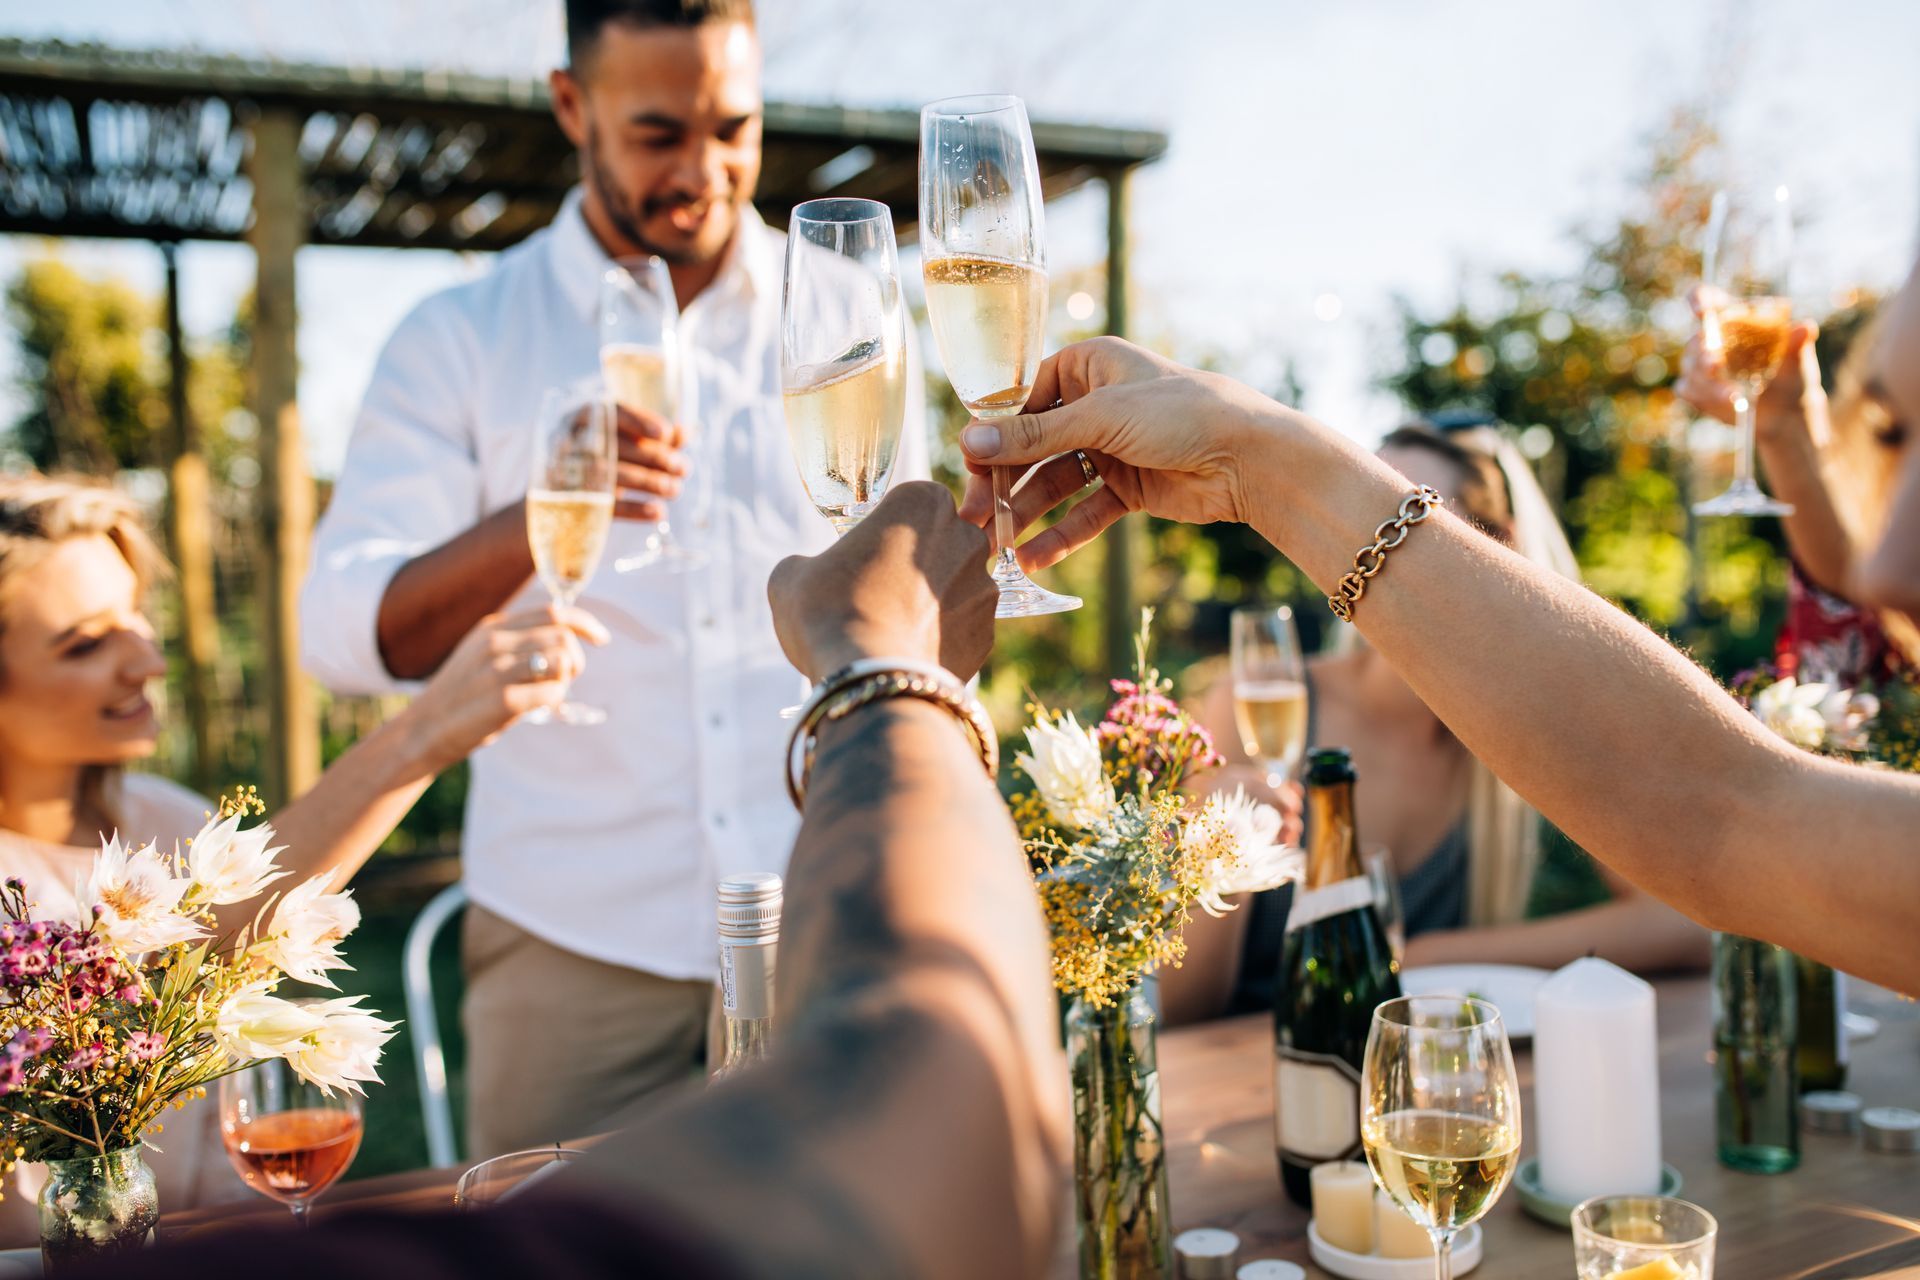 A group of people are toasting with champagne glasses at a table.